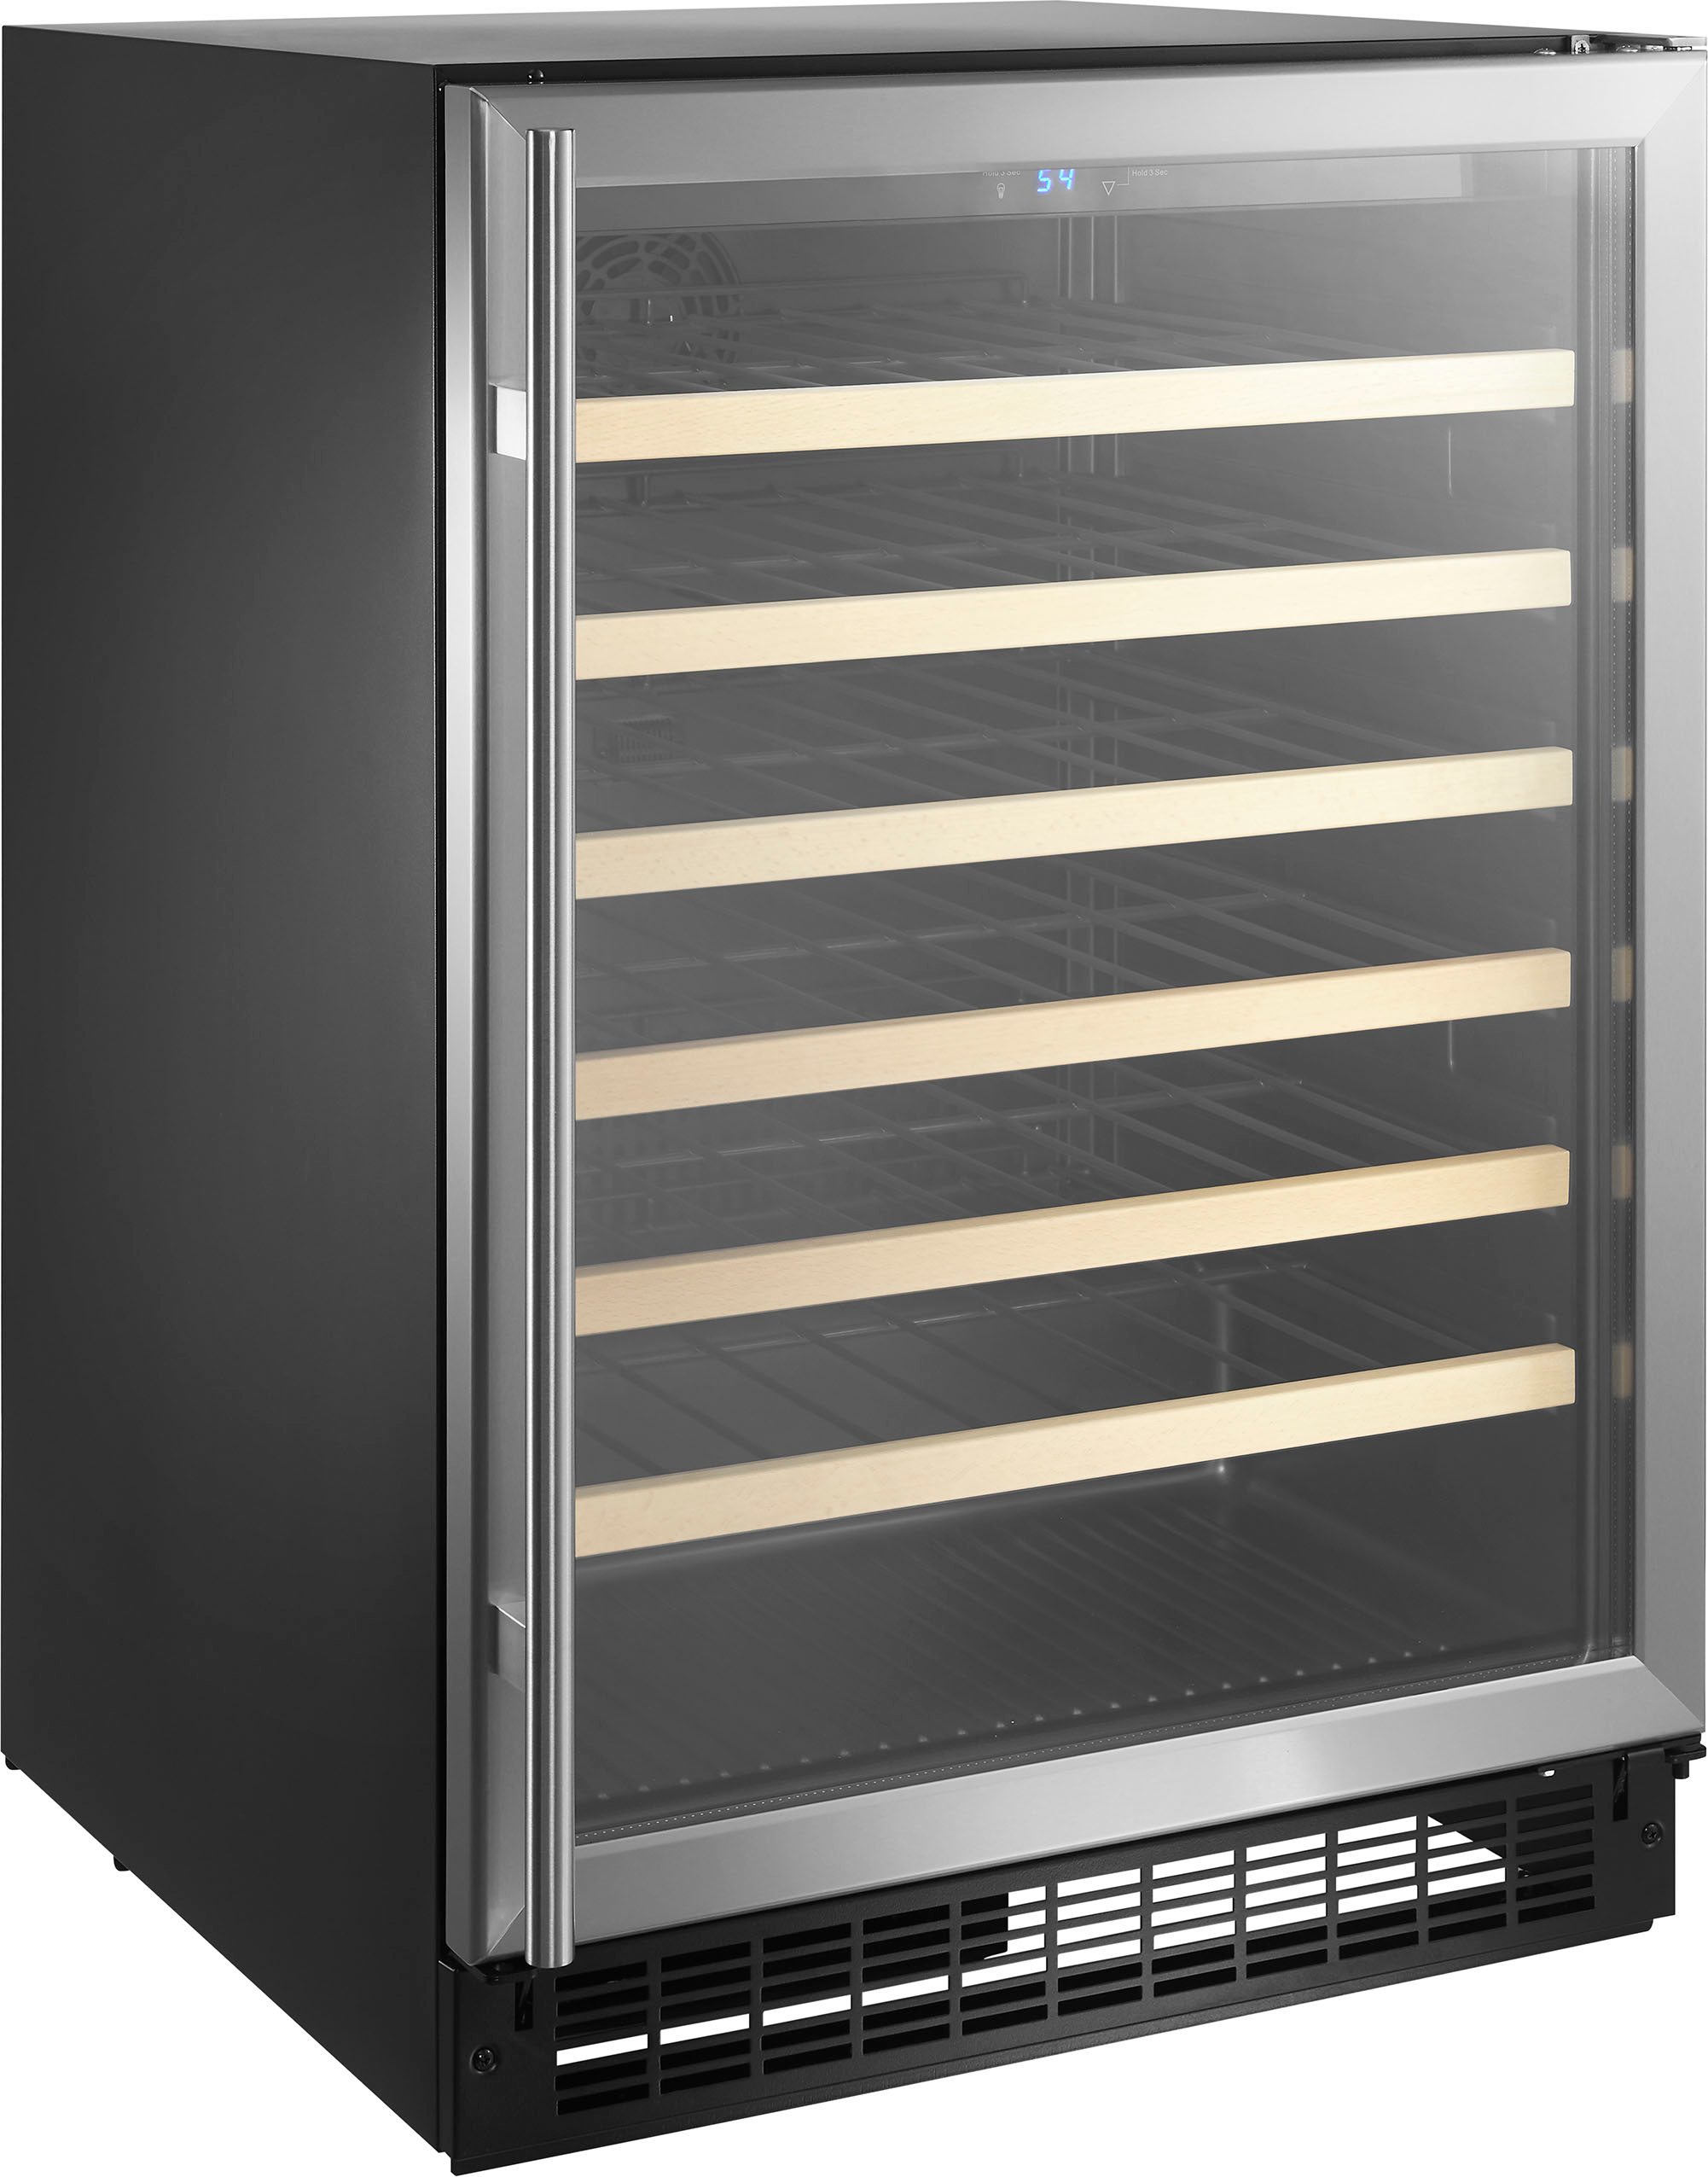 Angle View: Whirlpool - 34-Bottle Built-In Wine Cooler - Black on Stainless Steel